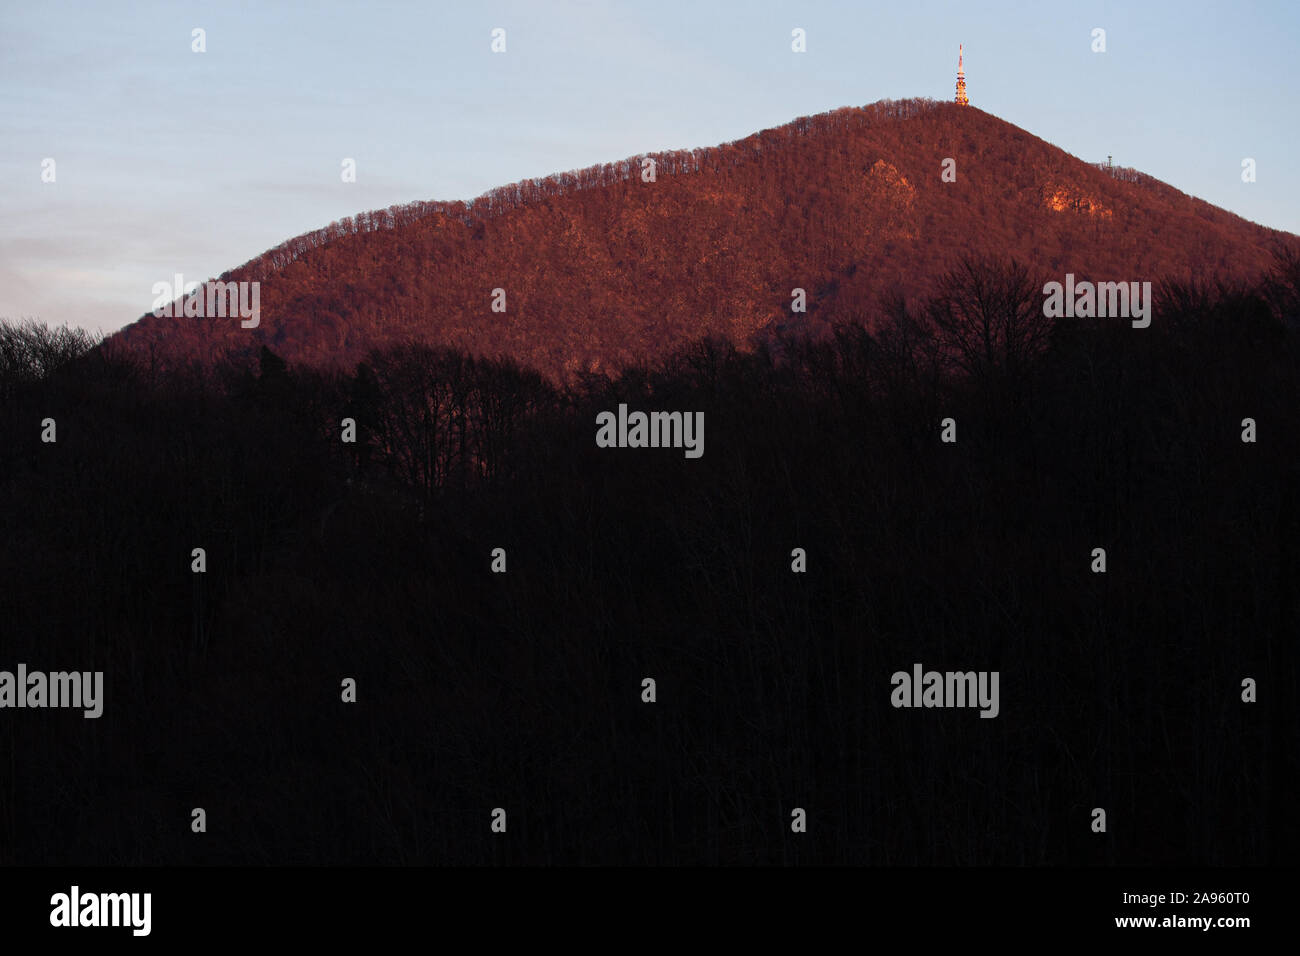 A mountain with a transmitter on its peak at sunset. Stock Photo